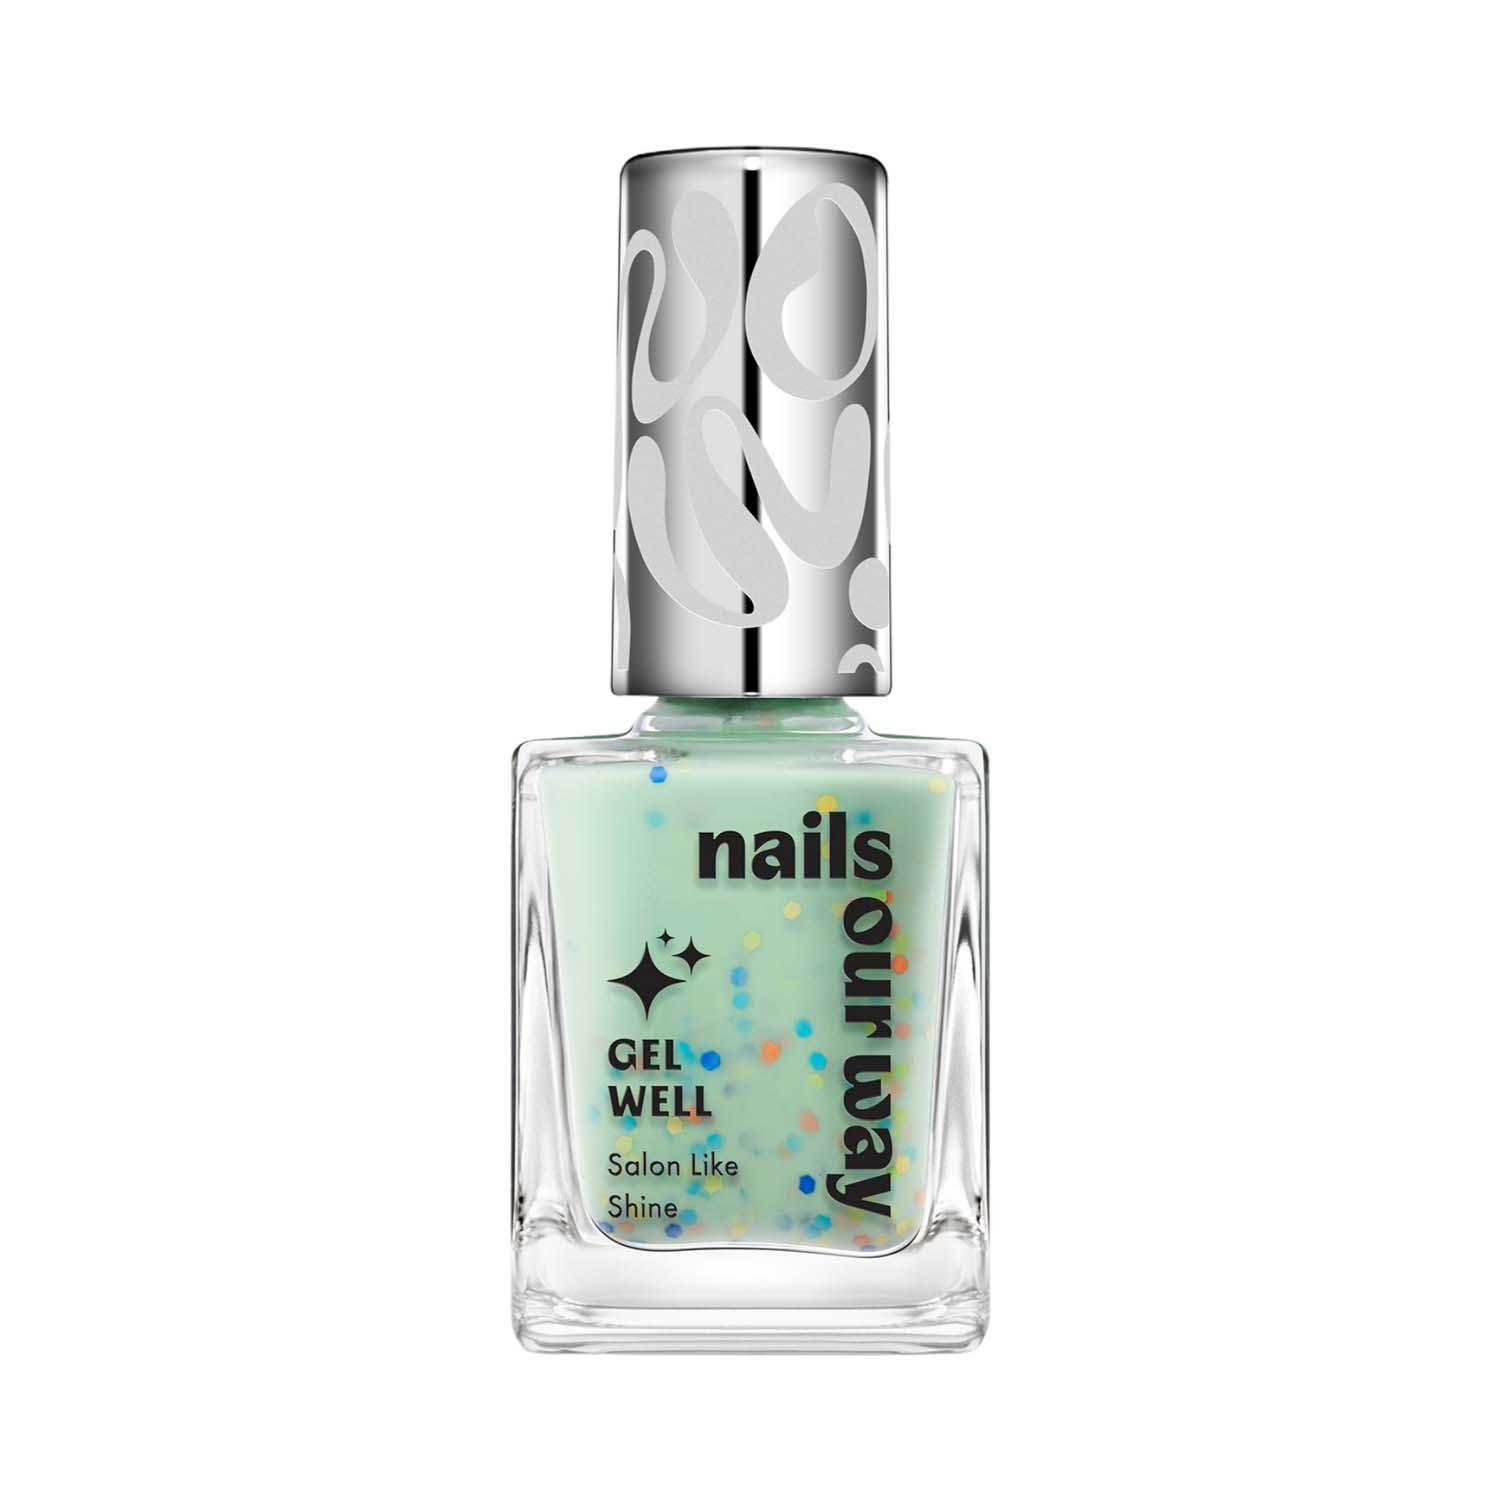 Nails Our Way | Nails Our Way Gel Well Nail Enamel - 408 Colourful (10 ml)